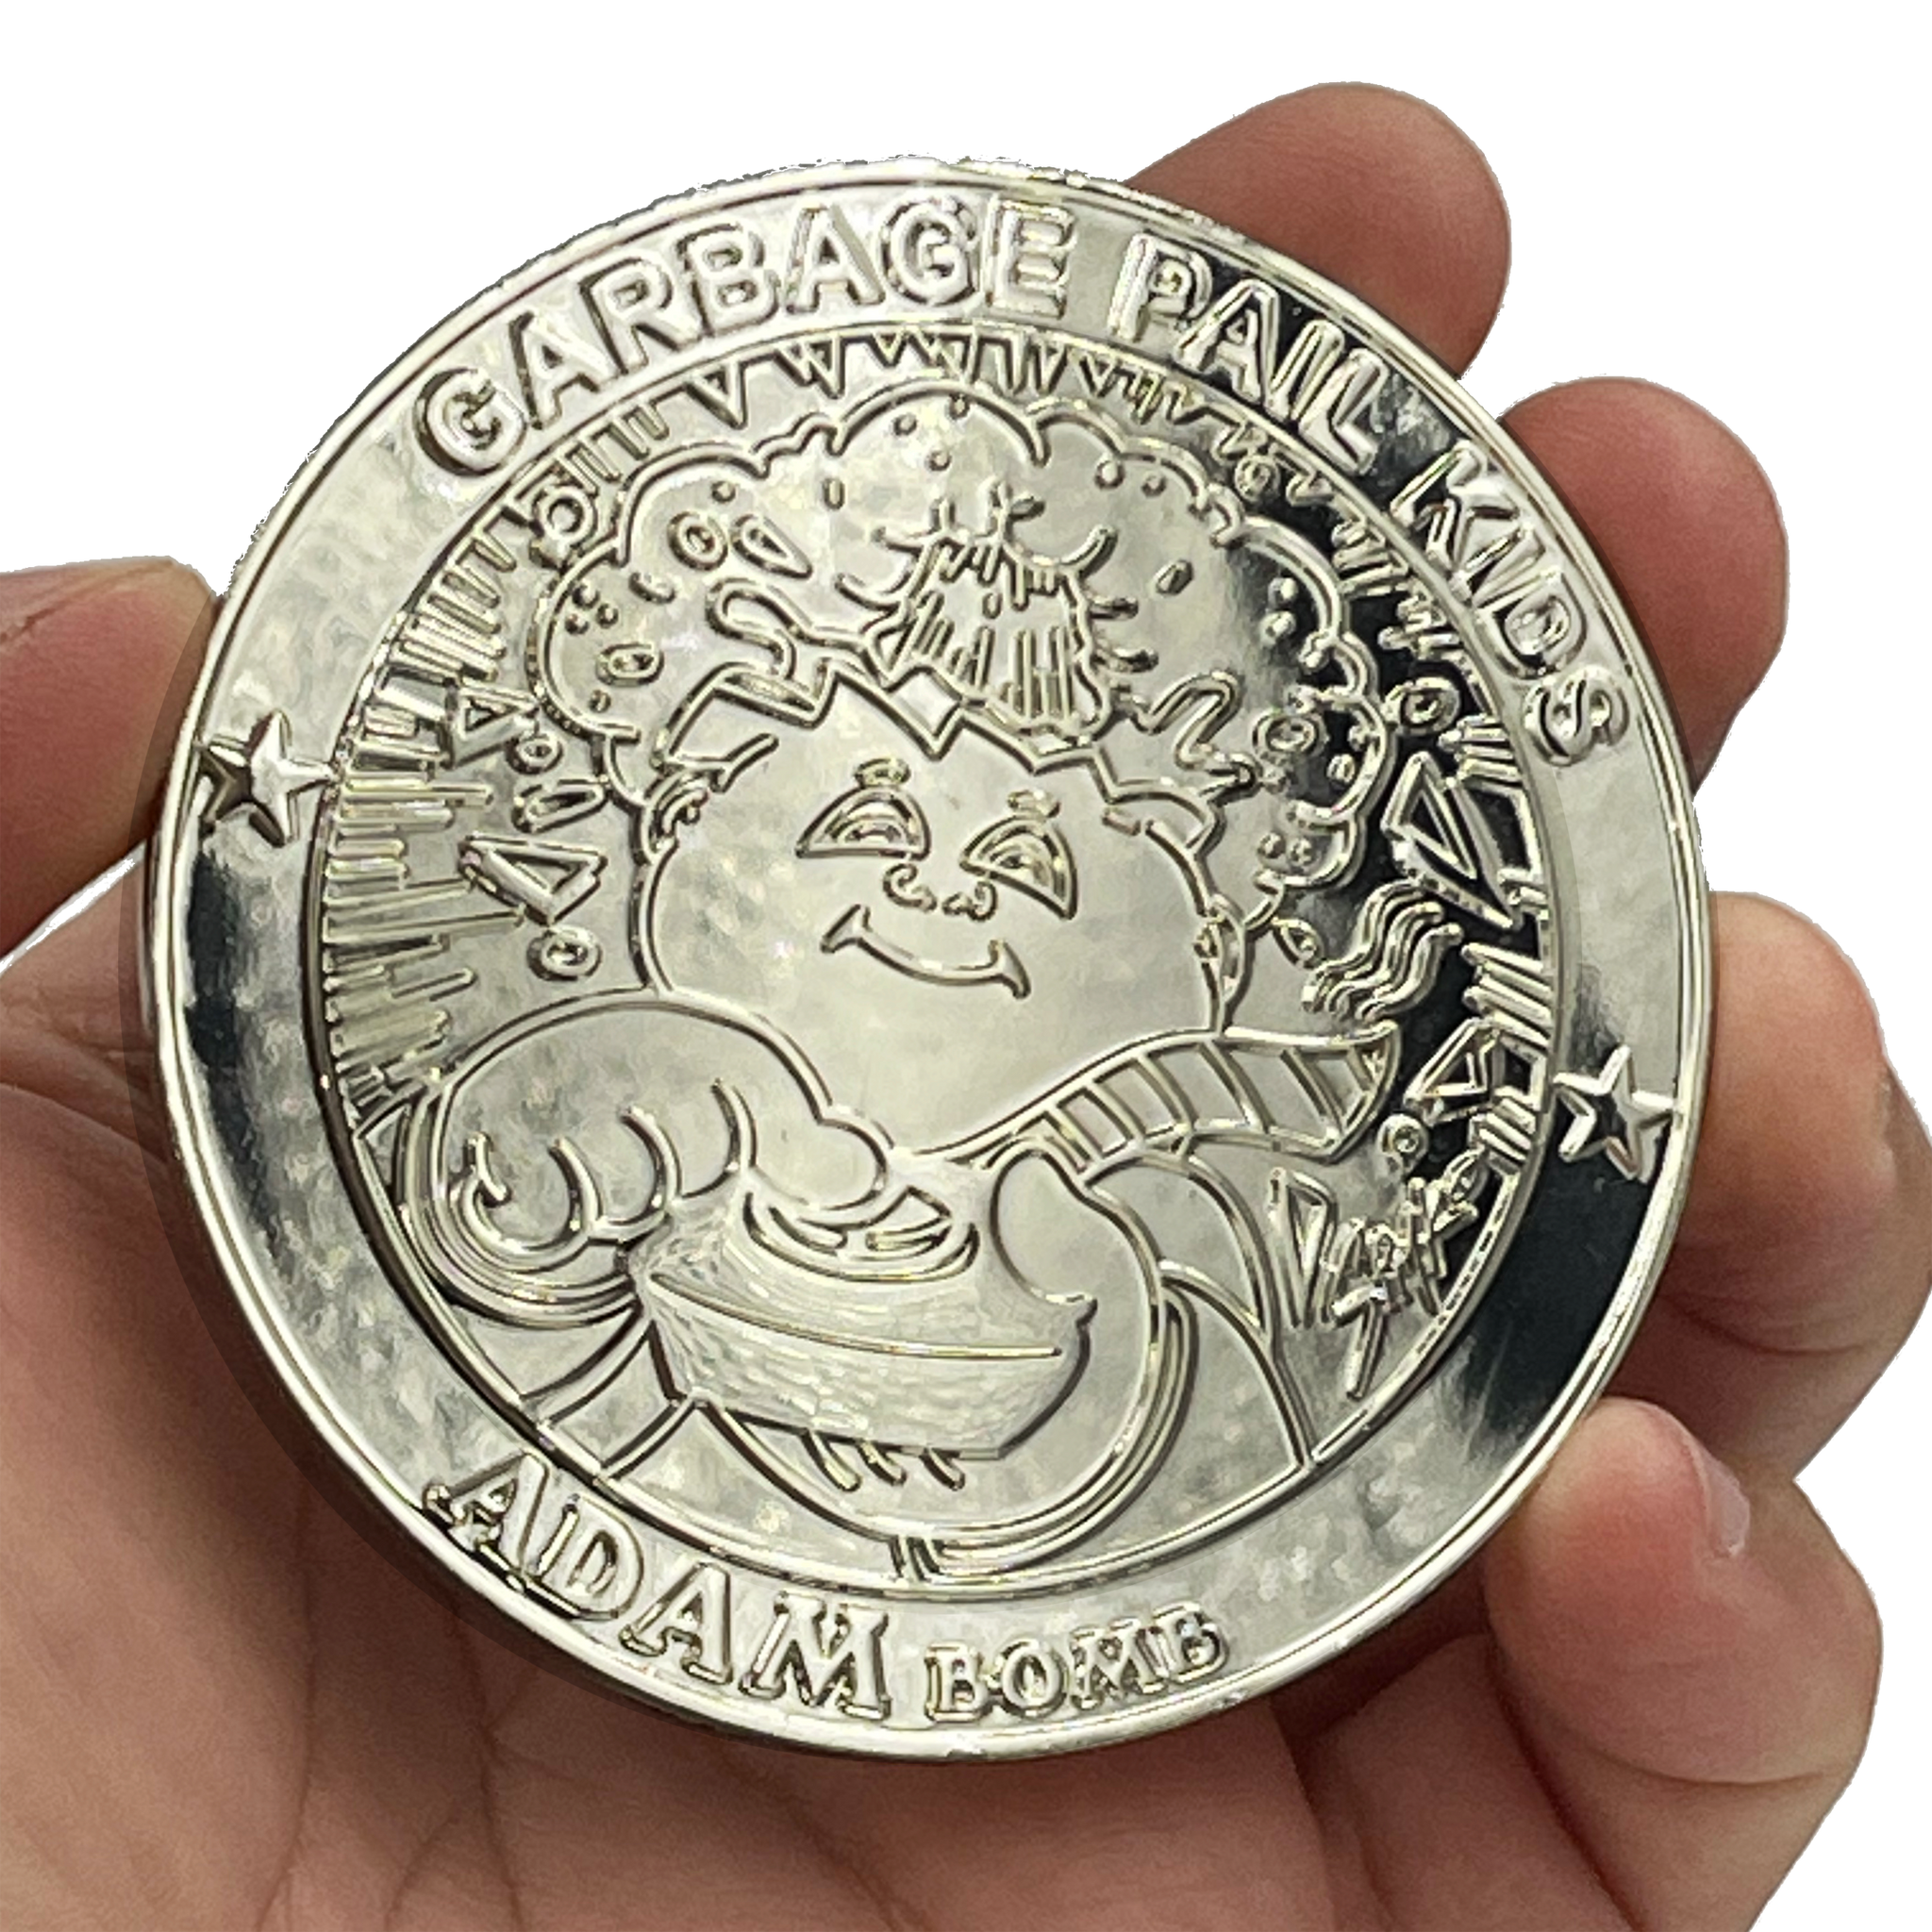 Sterling Silver Plated Variation 3 inch SIMKO Topps Officially Licensed Adam Bomb GPK Challenge Coin Garbage Pail Kids